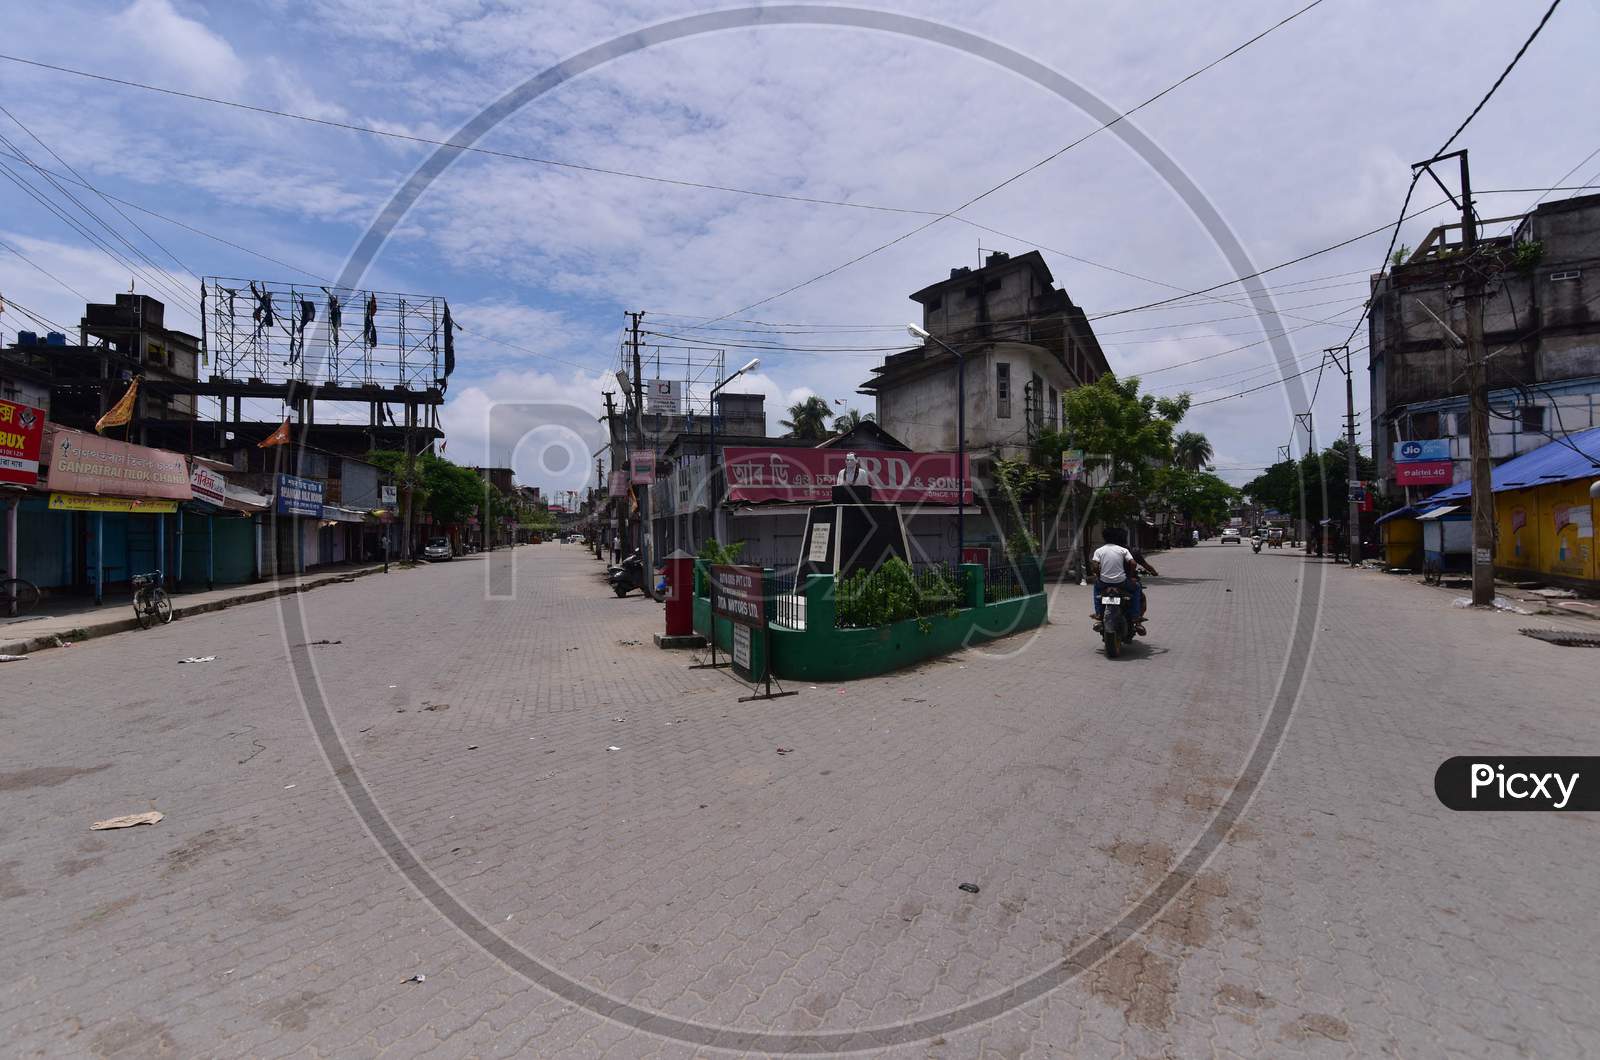 Roads turn empty as the government imposes lockdown to curb the spread of Coronavirus in Nagaon, Assam on July 05, 2020.